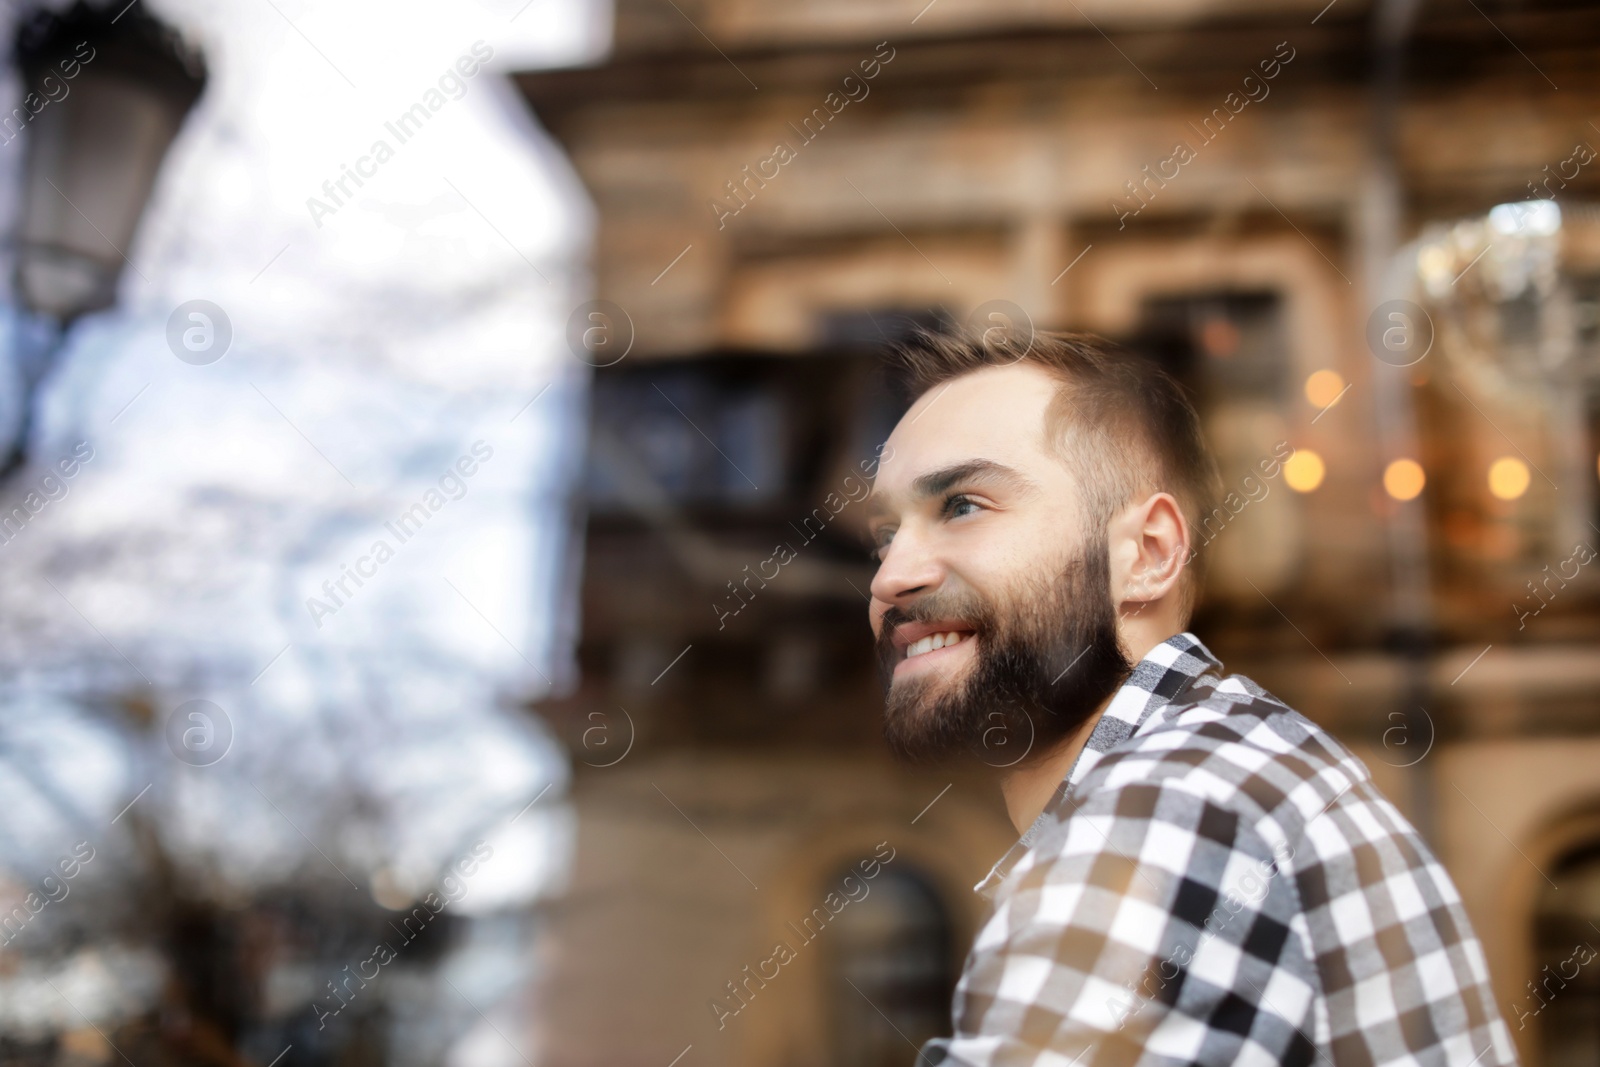 Photo of Handsome young man sitting in cafe, view from outdoors through window